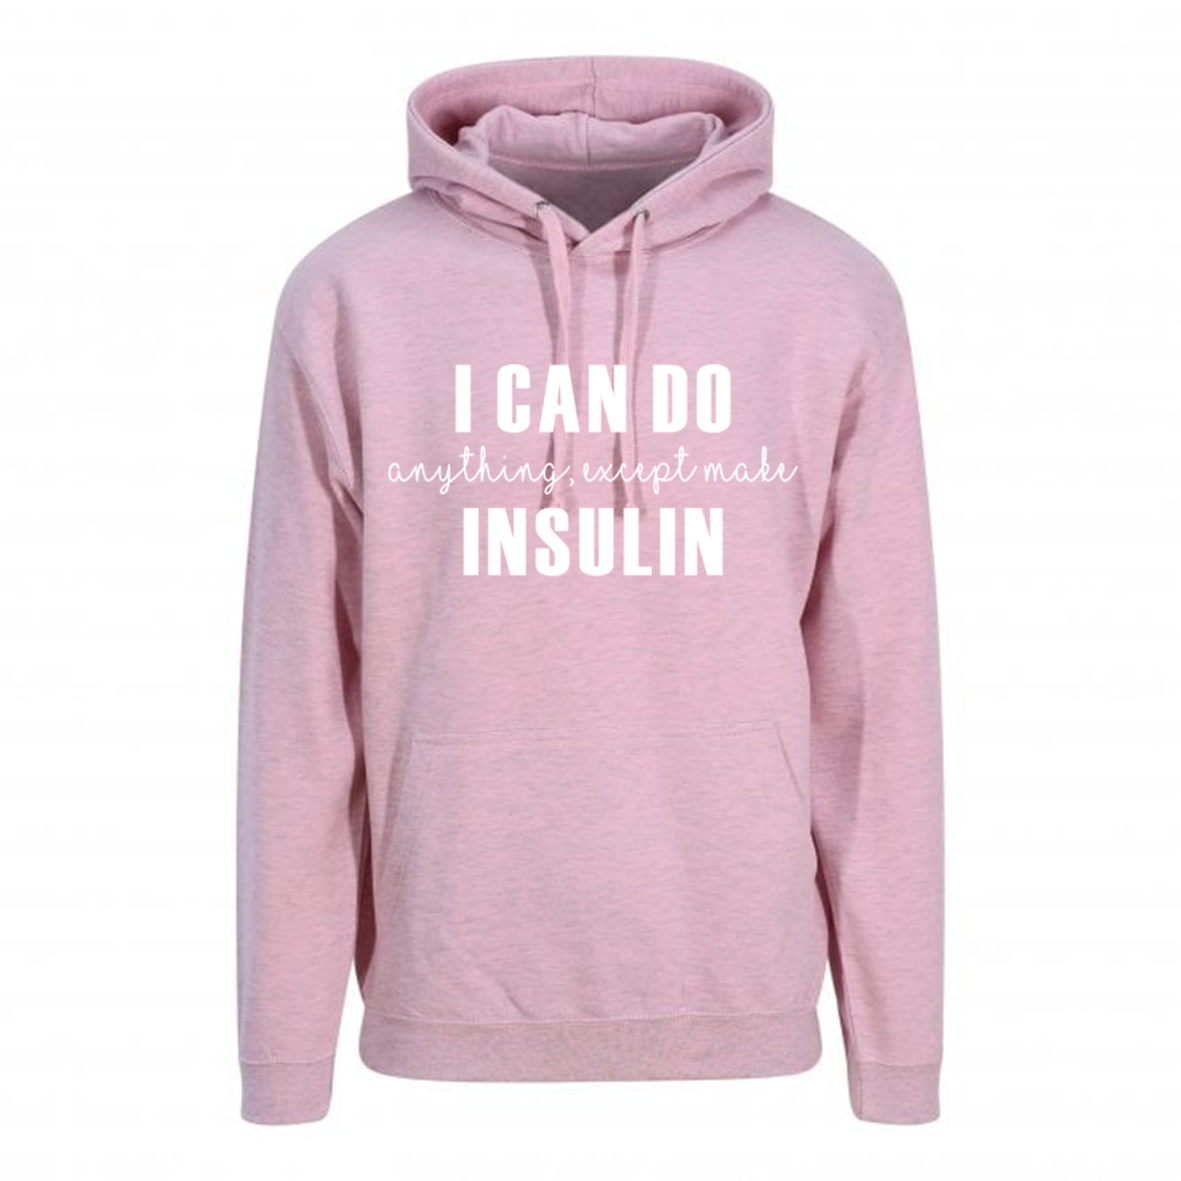 I Can Do Anything, Except Make Insulin Pastel Hoodie